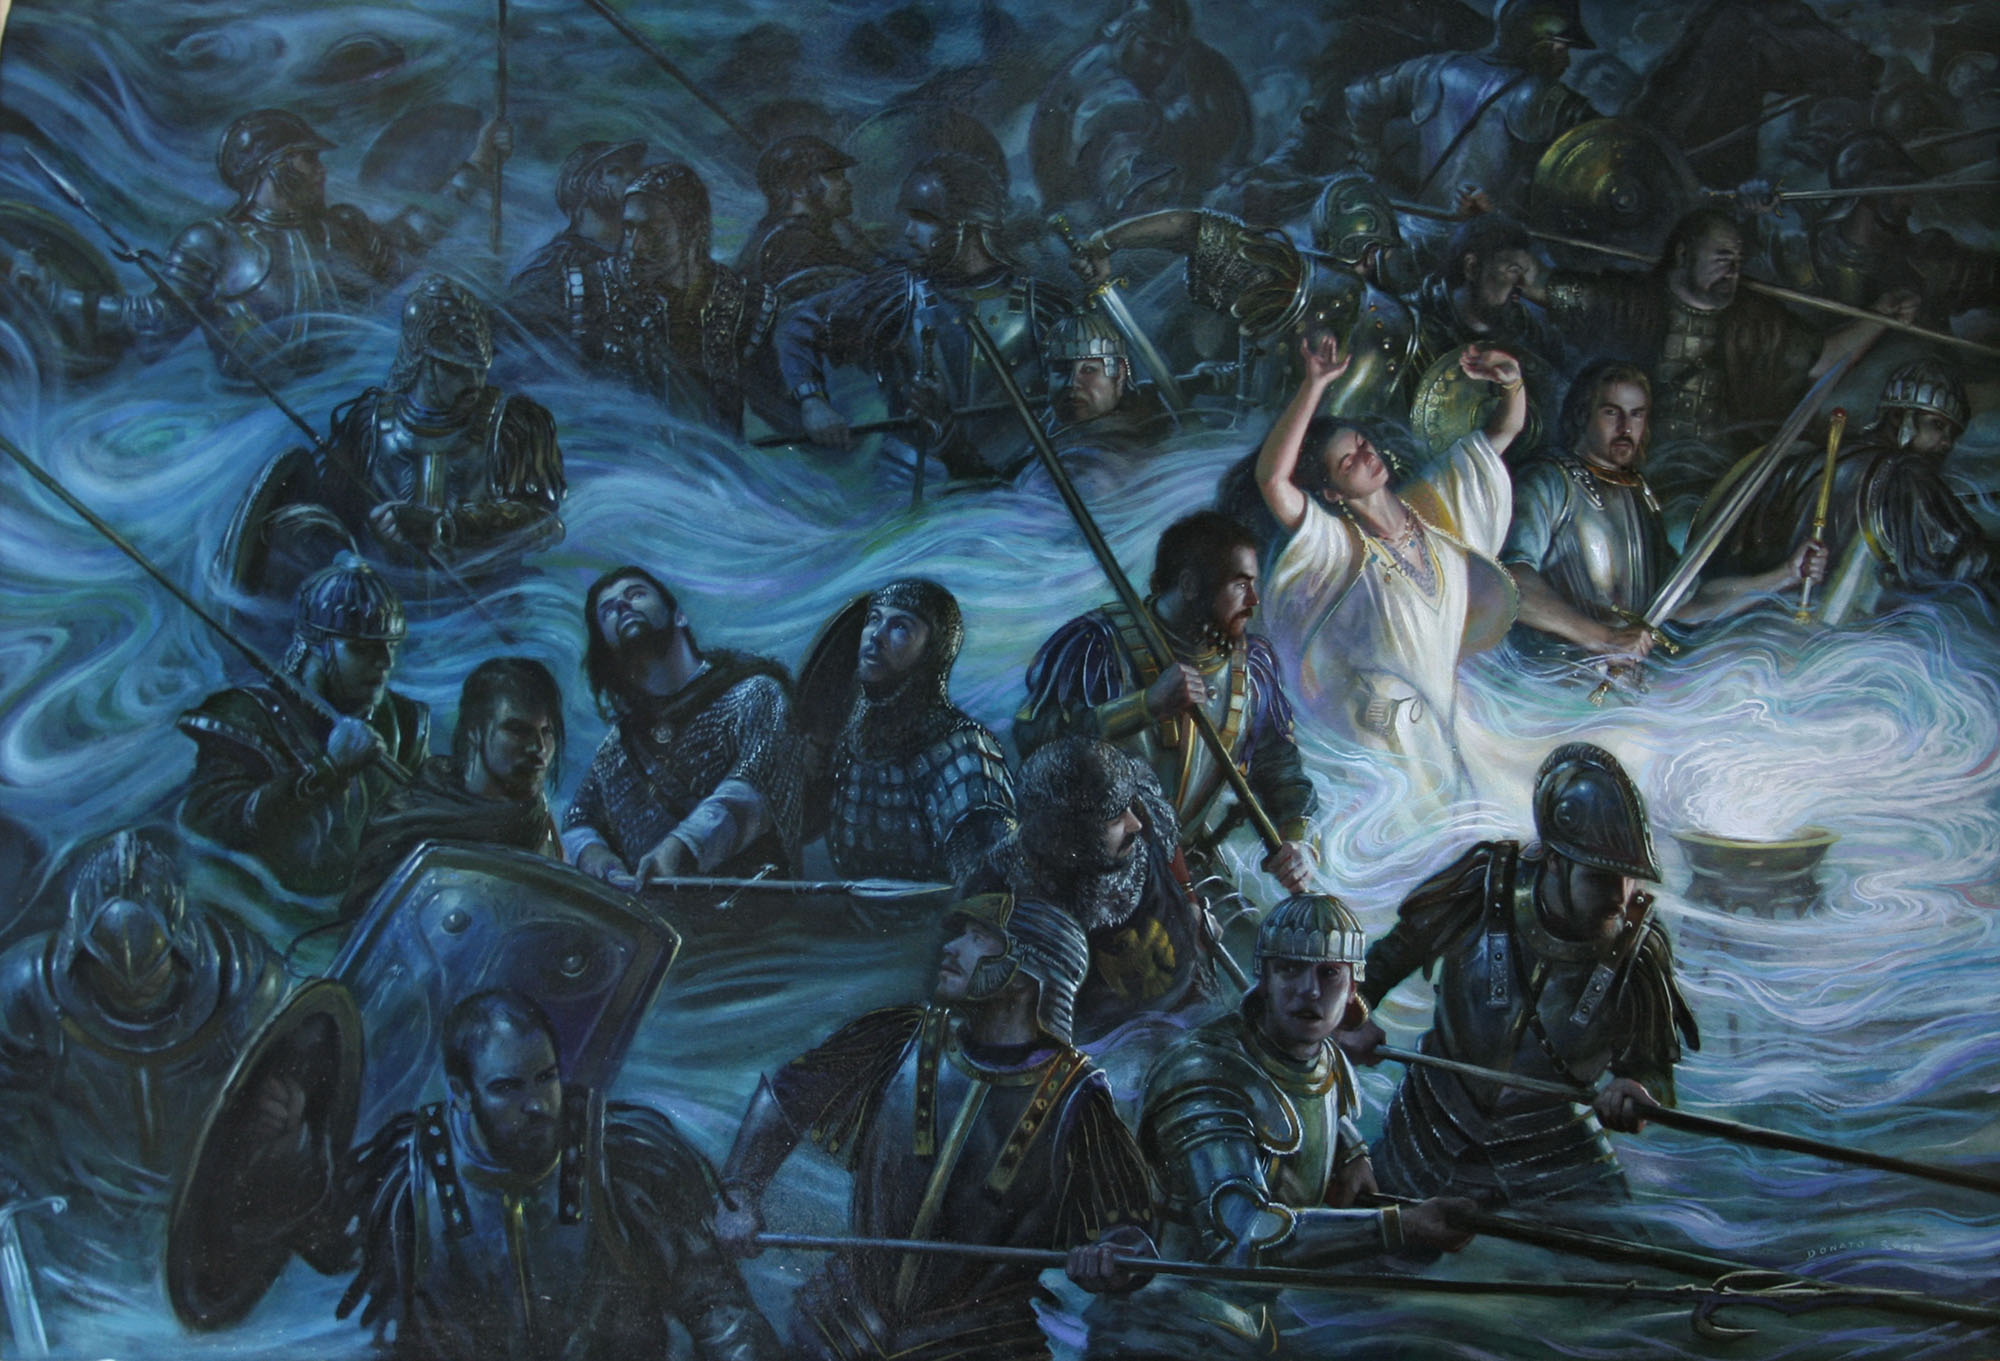 The Gods Return
36" x 24" Oil on Paper on Panel 2008
cover for the novel The Gods Return: The Crown of the Isles,
the third novel in The Crown of the Isles series by David Drake
private collection